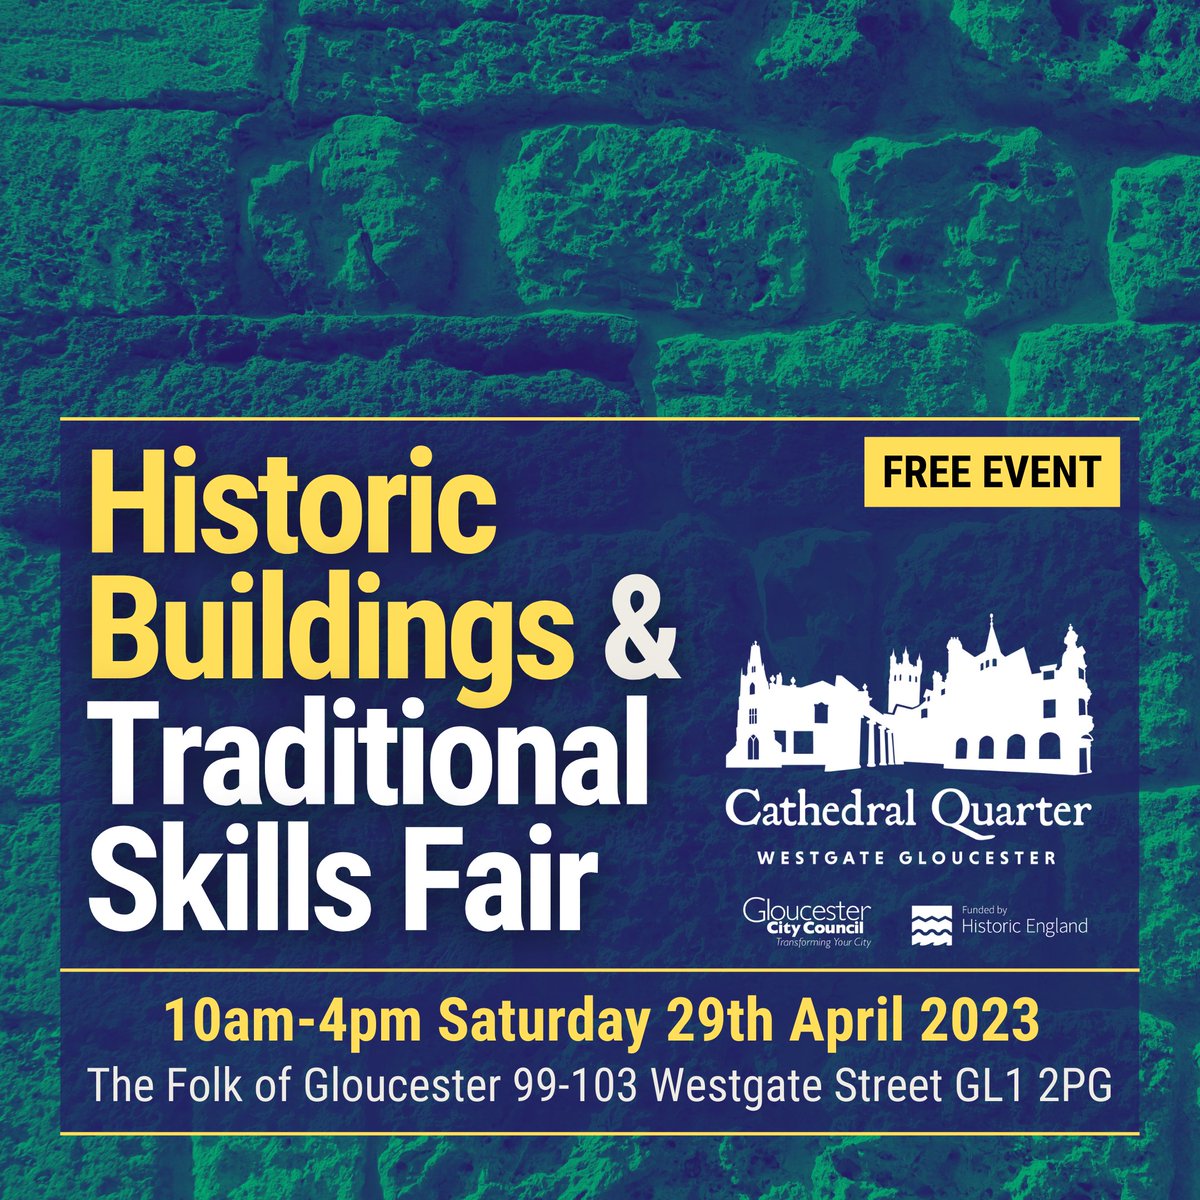 Historic Buildings & Traditional Skills Fair 🧱Join us Saturday 10am-4pm for live demonstrations of heritage skills including stonemasonry, signwriting, and lime plasterwork 📷Hear from experts about Gloucester's #heritage and its ongoing regeneration 📷#gloucester